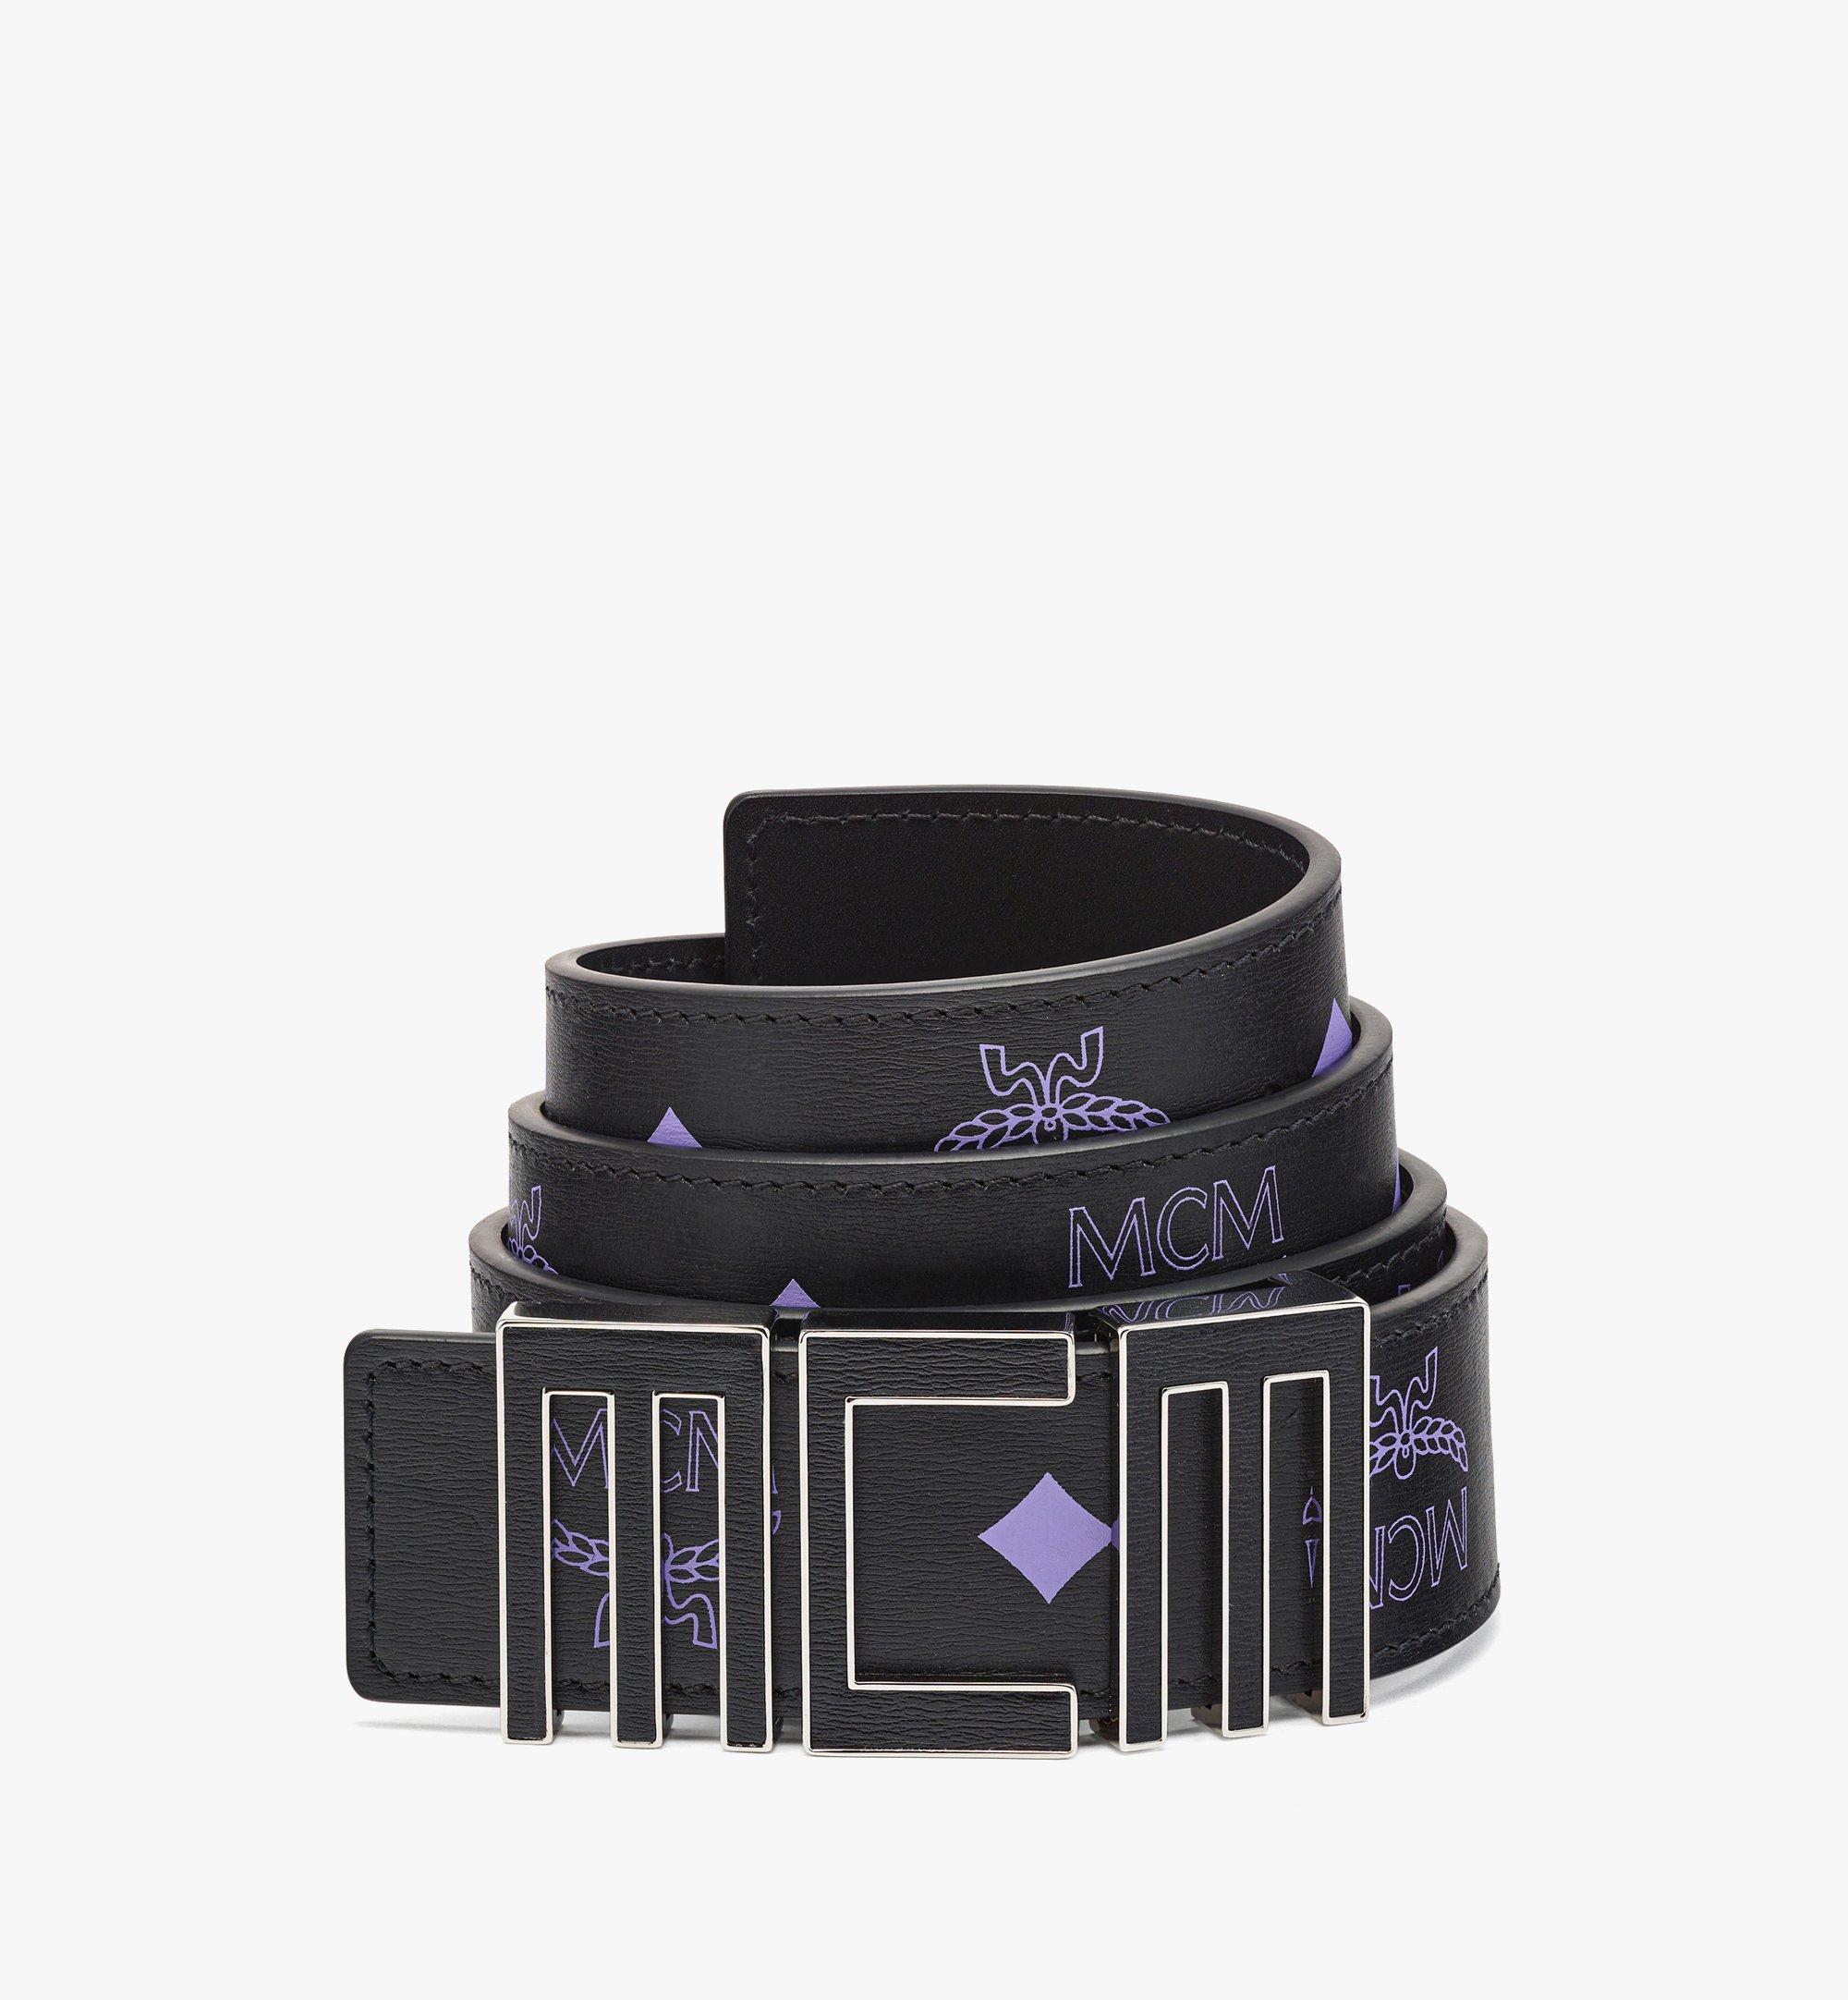 MCM Leather Inlay Tech MCM Belt 1.5” in Embossed Leather Purple MXBCSTC03U4100 Alternate View 1